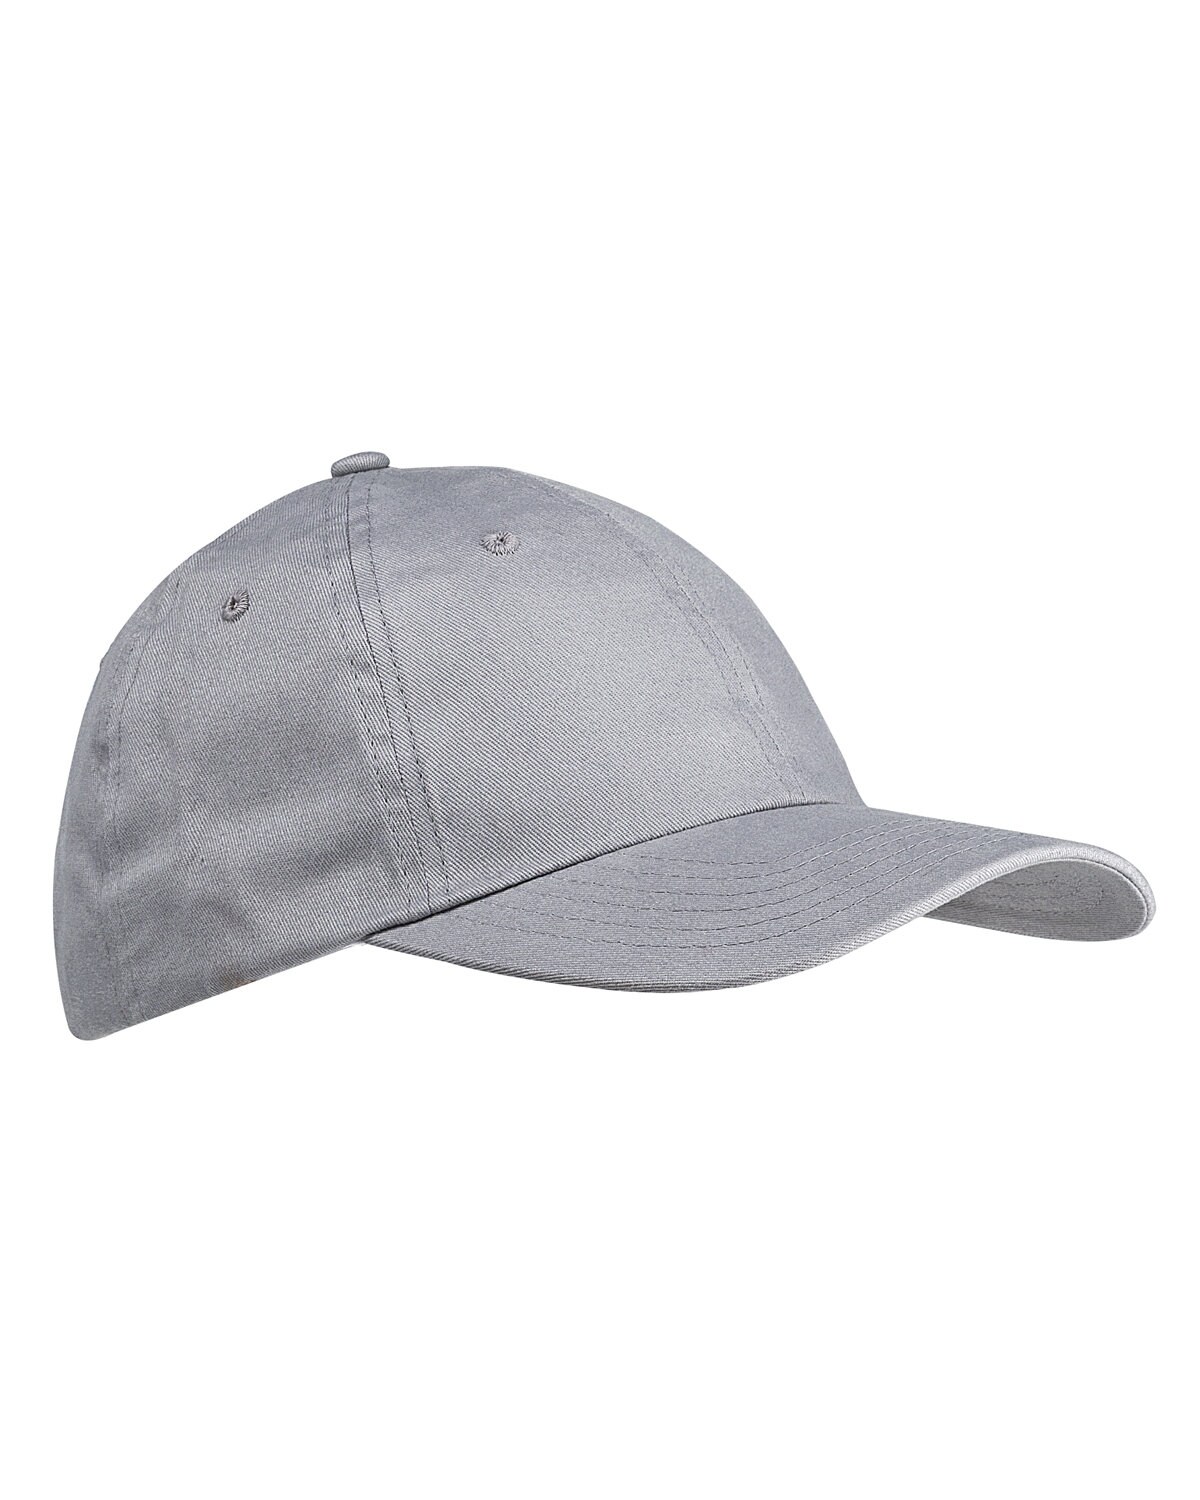 BIG ACCESSORIES 6-Panel Brushed Twill Unstructured Cap, BX001